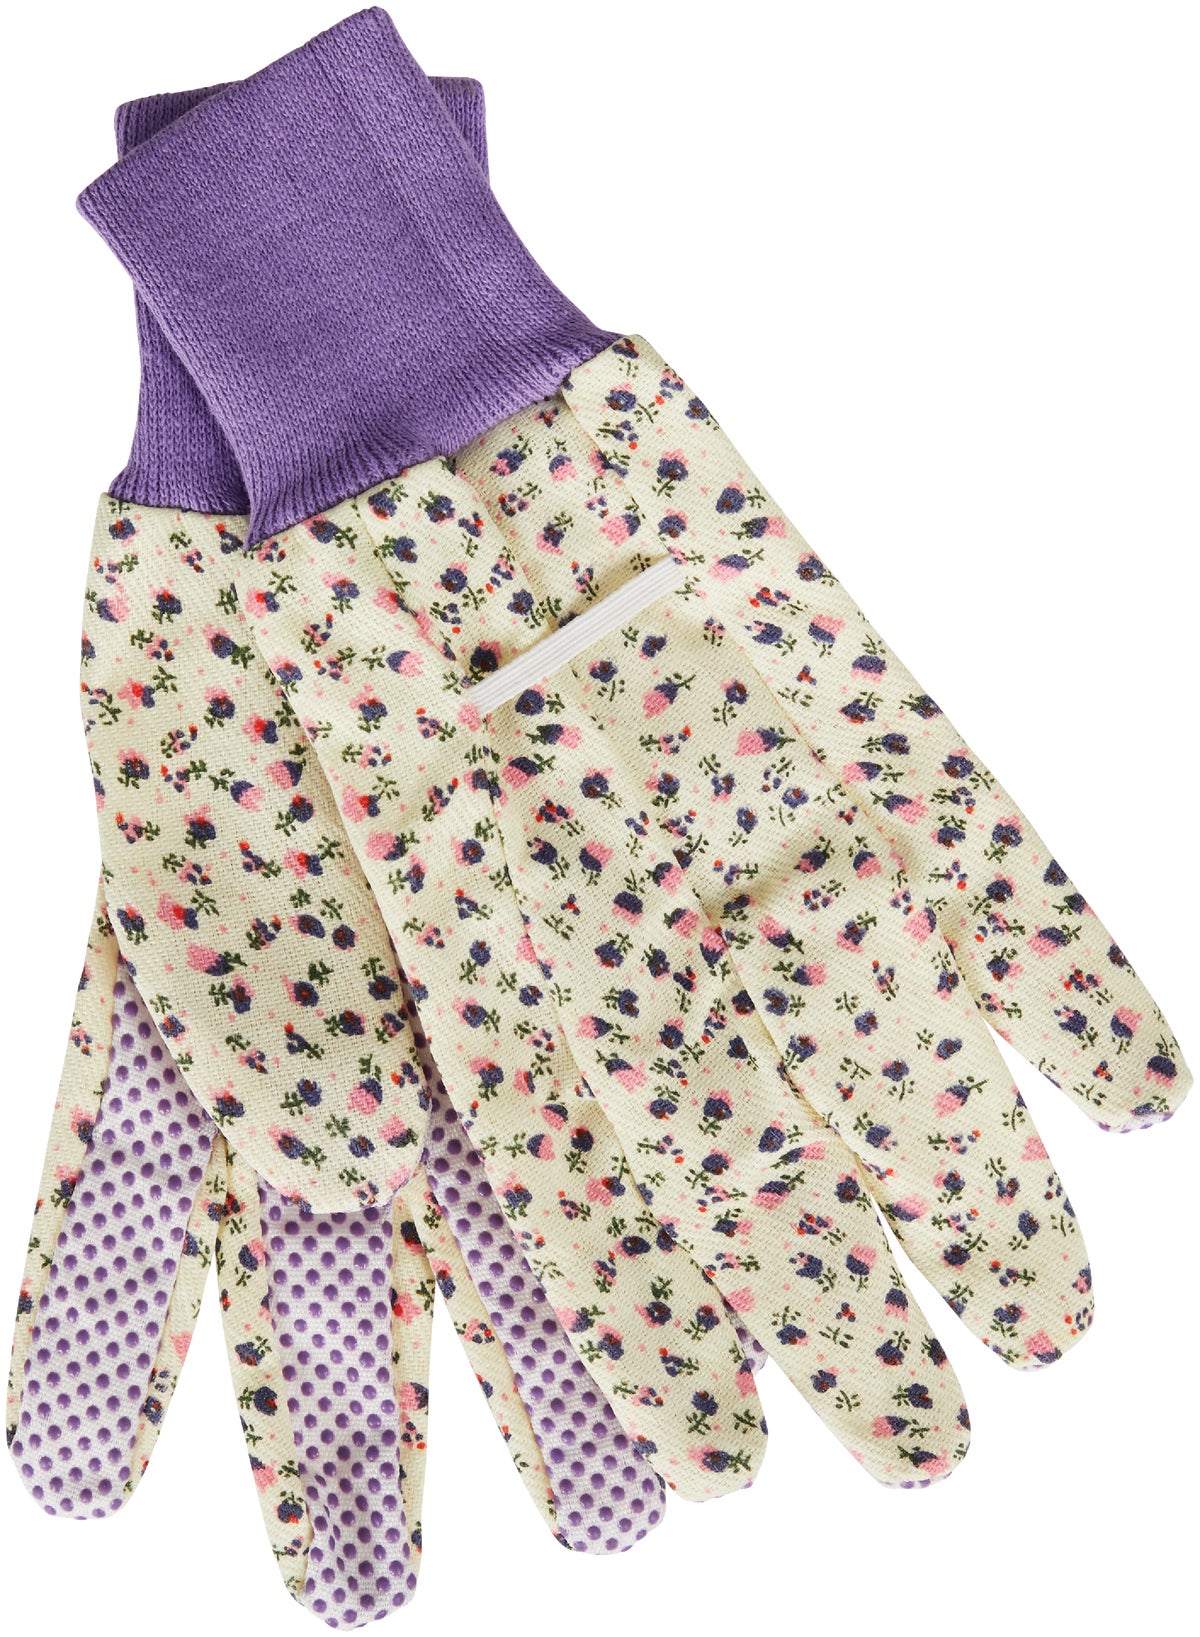 Cotton Knit Gardening Gloves with Dotted Palm Floral Print Glove12 Pack 